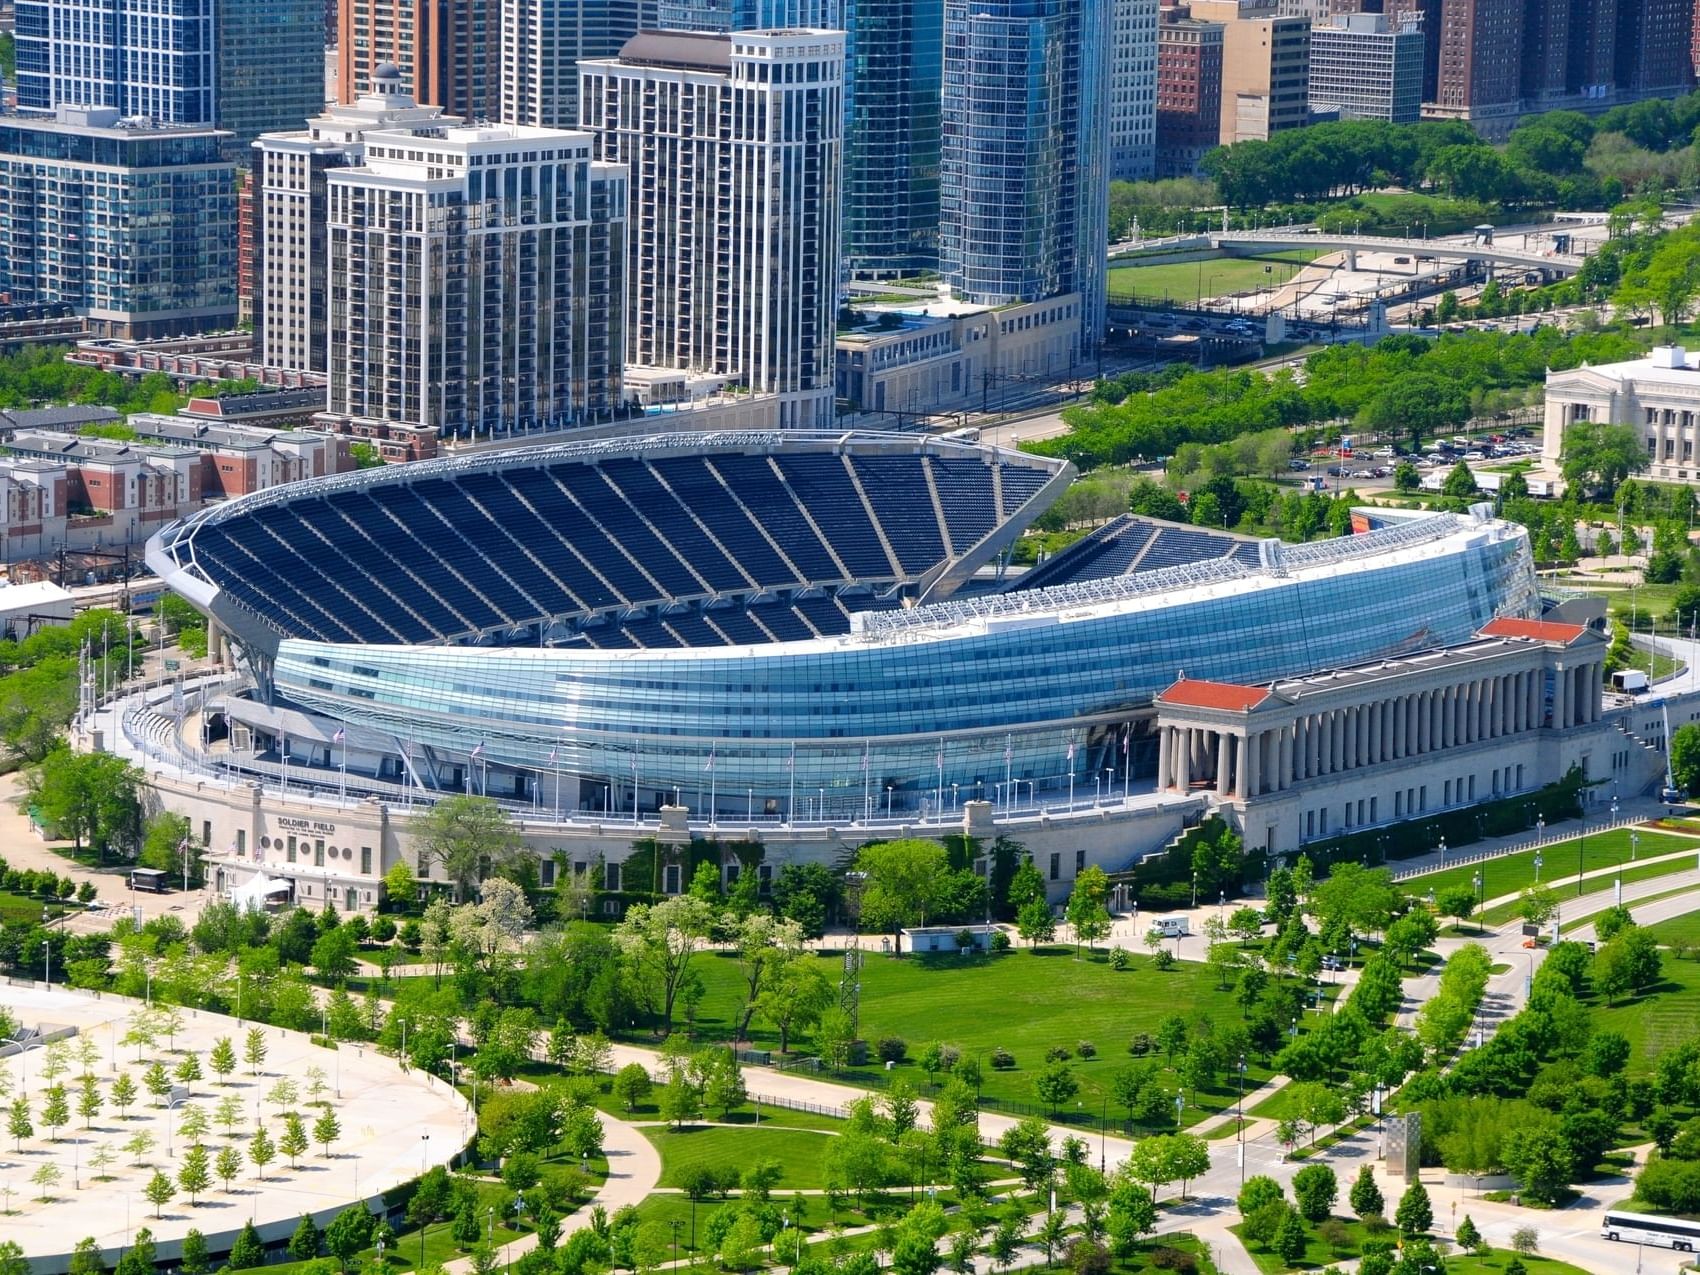 Aerial view of the Soldier Field near Hotel Saint Clair